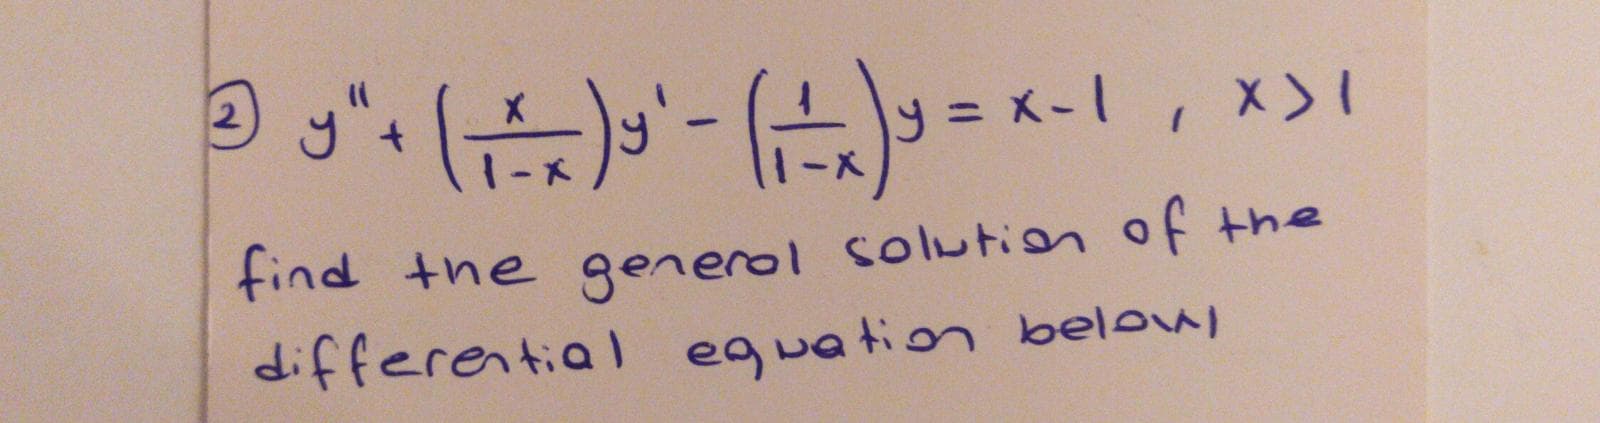 2
= x-1, x>1
find the generol solution of the
differential l
equation below
